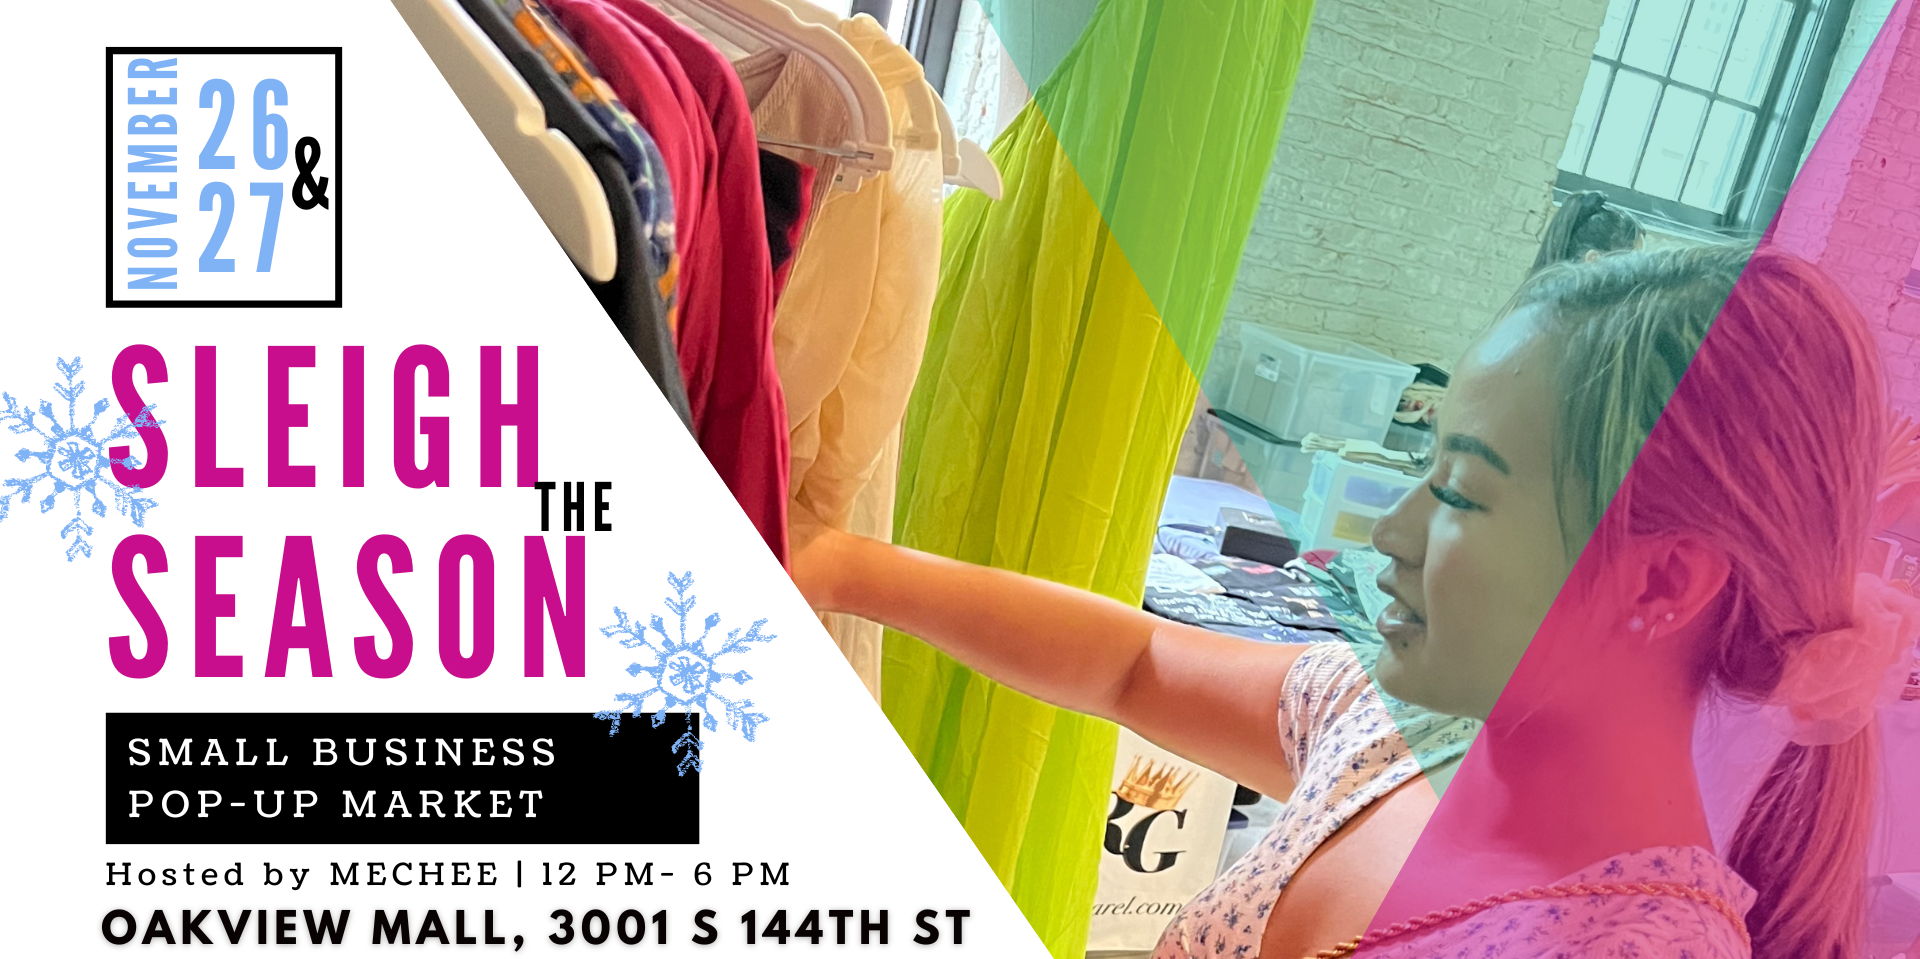 Sleigh the Season: Small Business Pop-UP Market promotional image